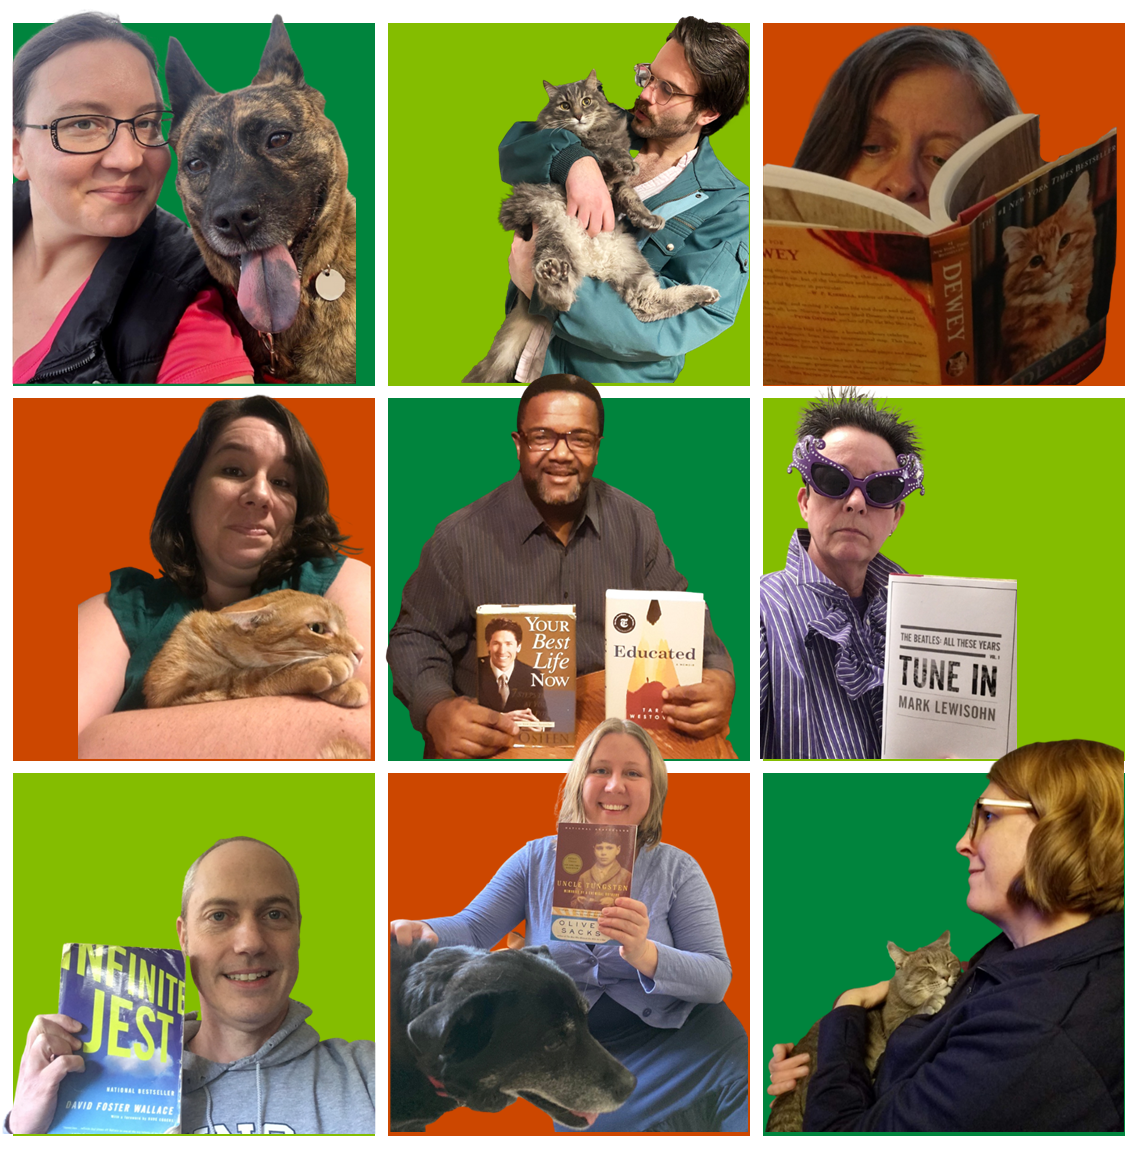 2021-2022 Durham Tech Library staff. More details in caption, including book or animal component and professional title